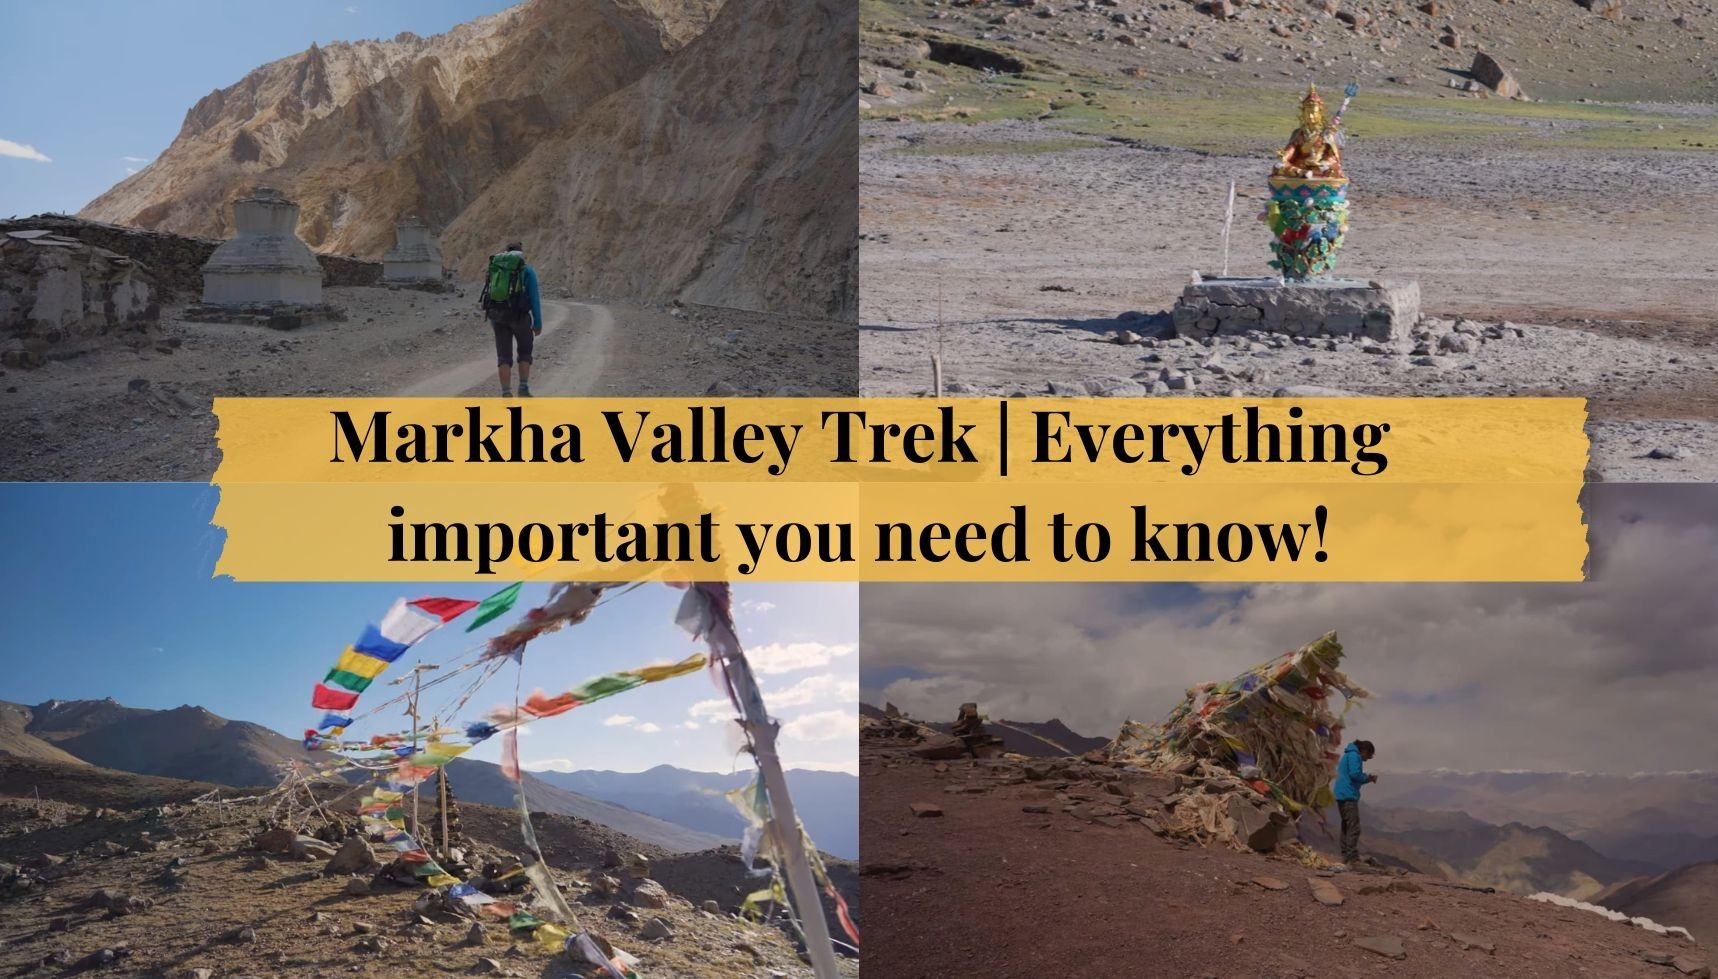 Markha Valley Trek: Everything Important You Need to Know!